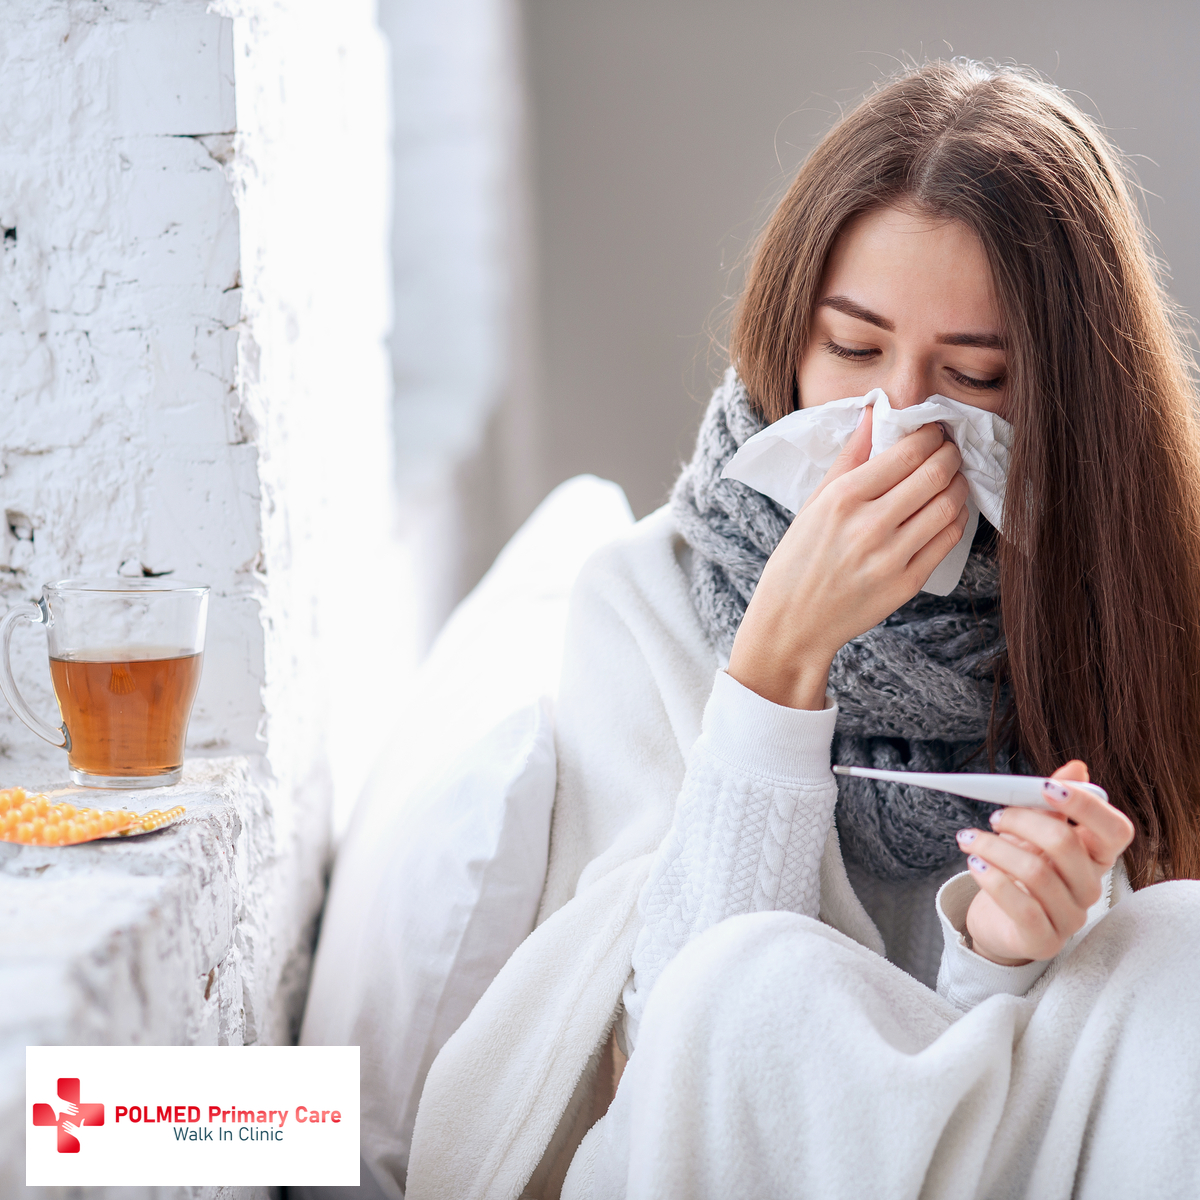 Get Influenza Under Control with Testing and Treatment at Our Walk-in Clinic!